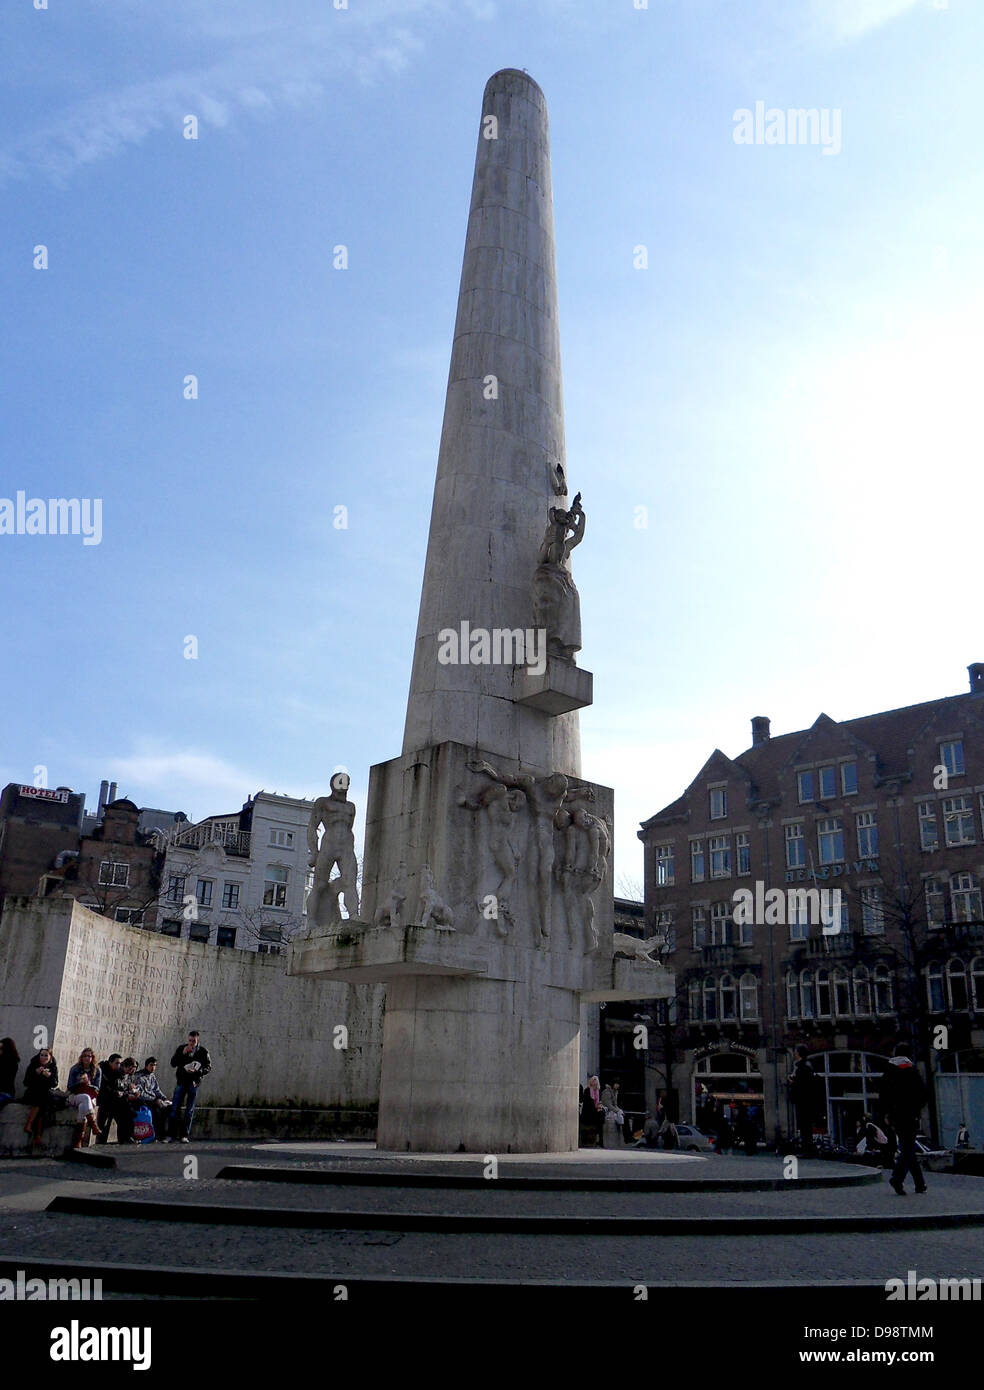 Dam Square, or simply the Dam (Dutch: de Dam) is a town square in Amsterdam, the capital of the Netherlands. The National Monument (Dutch: Nationaal Monument or Nationaal Monument op de Dam) is a 1956 World War II monument on Dam Square in Amsterdam. Stock Photo